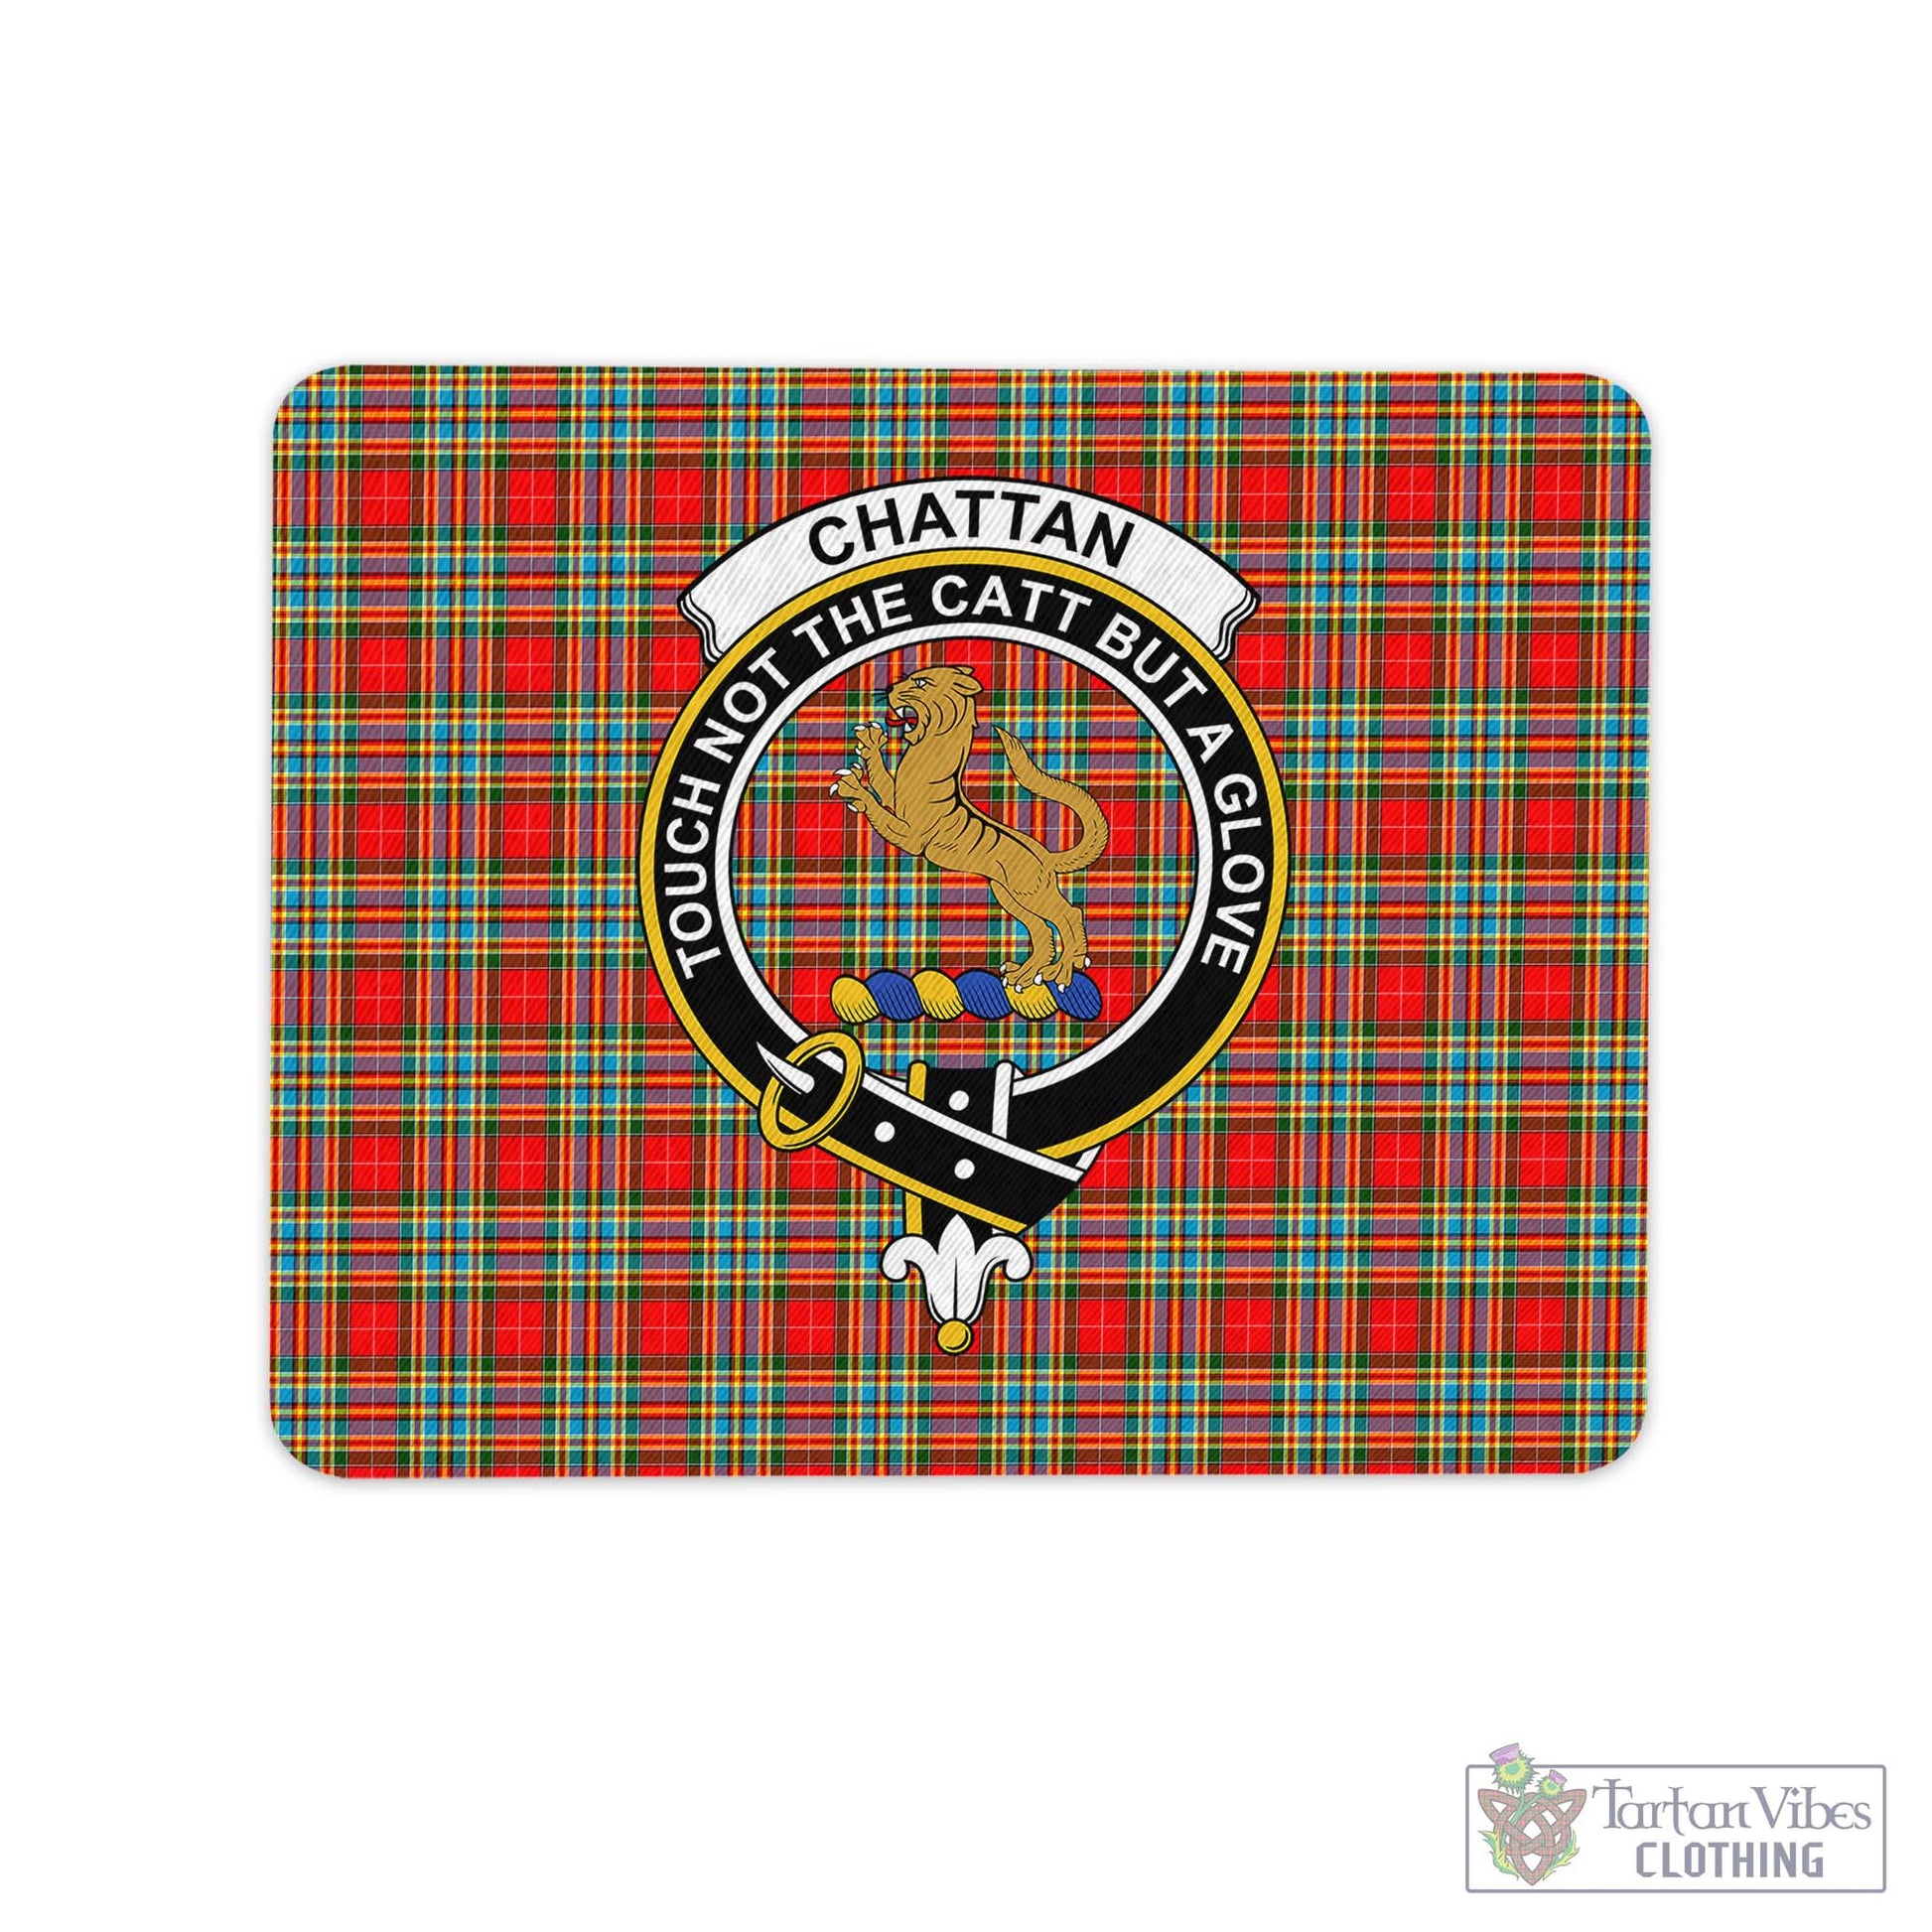 Tartan Vibes Clothing Chattan Tartan Mouse Pad with Family Crest